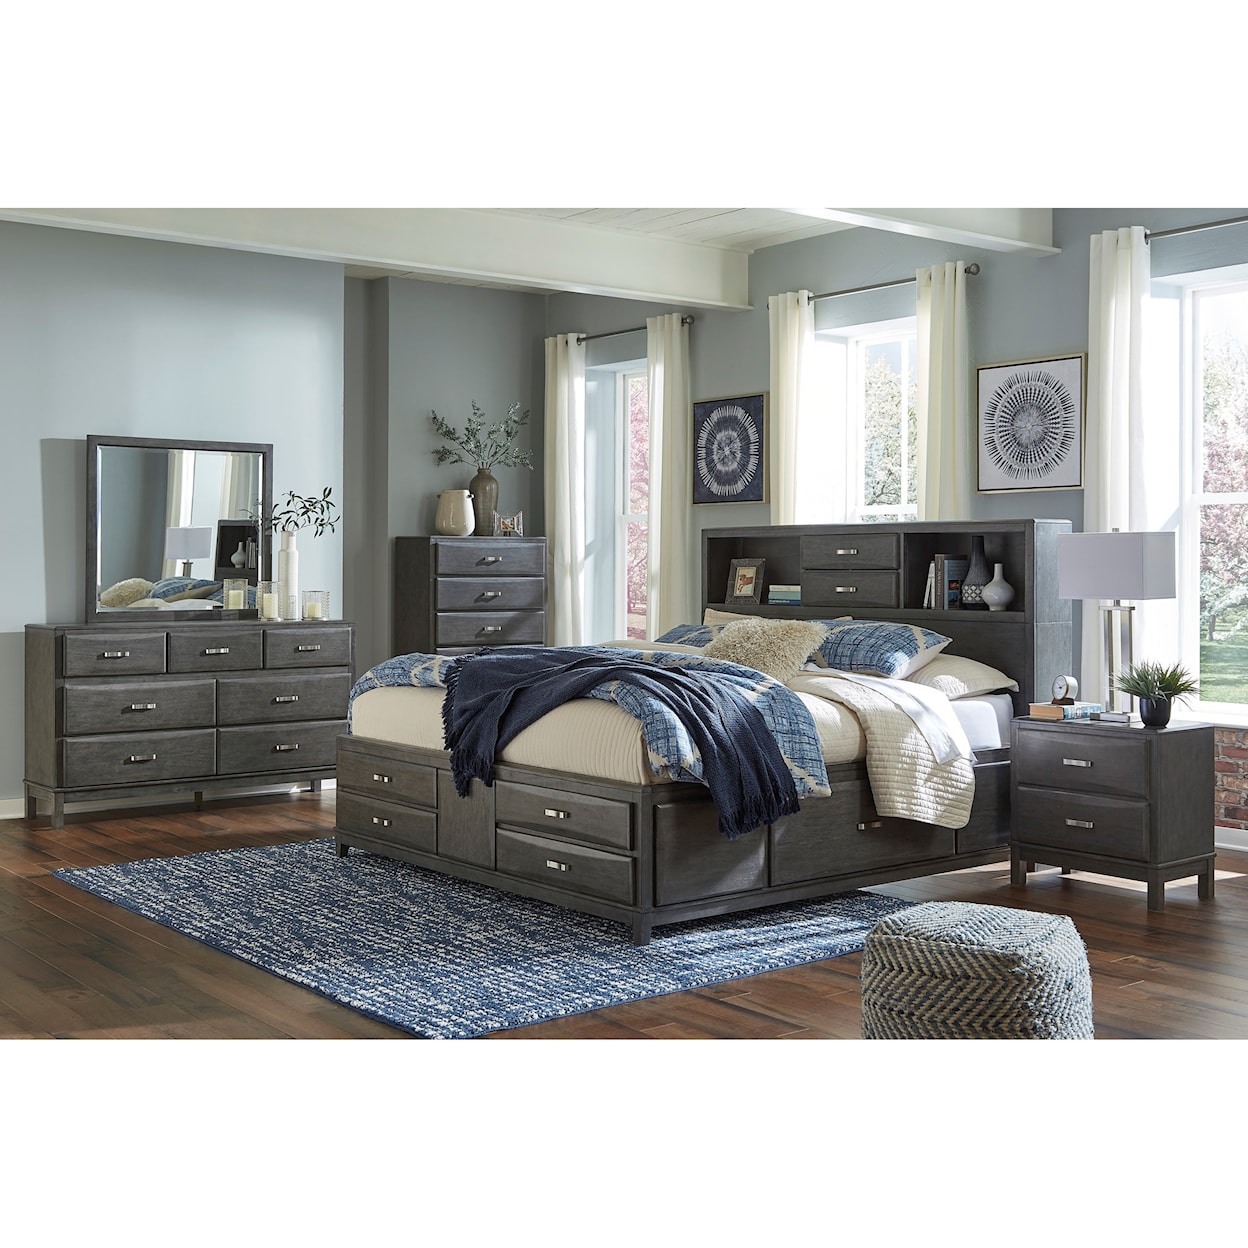 Signature Caitlyn California King Storage Bed with 8 Drawers